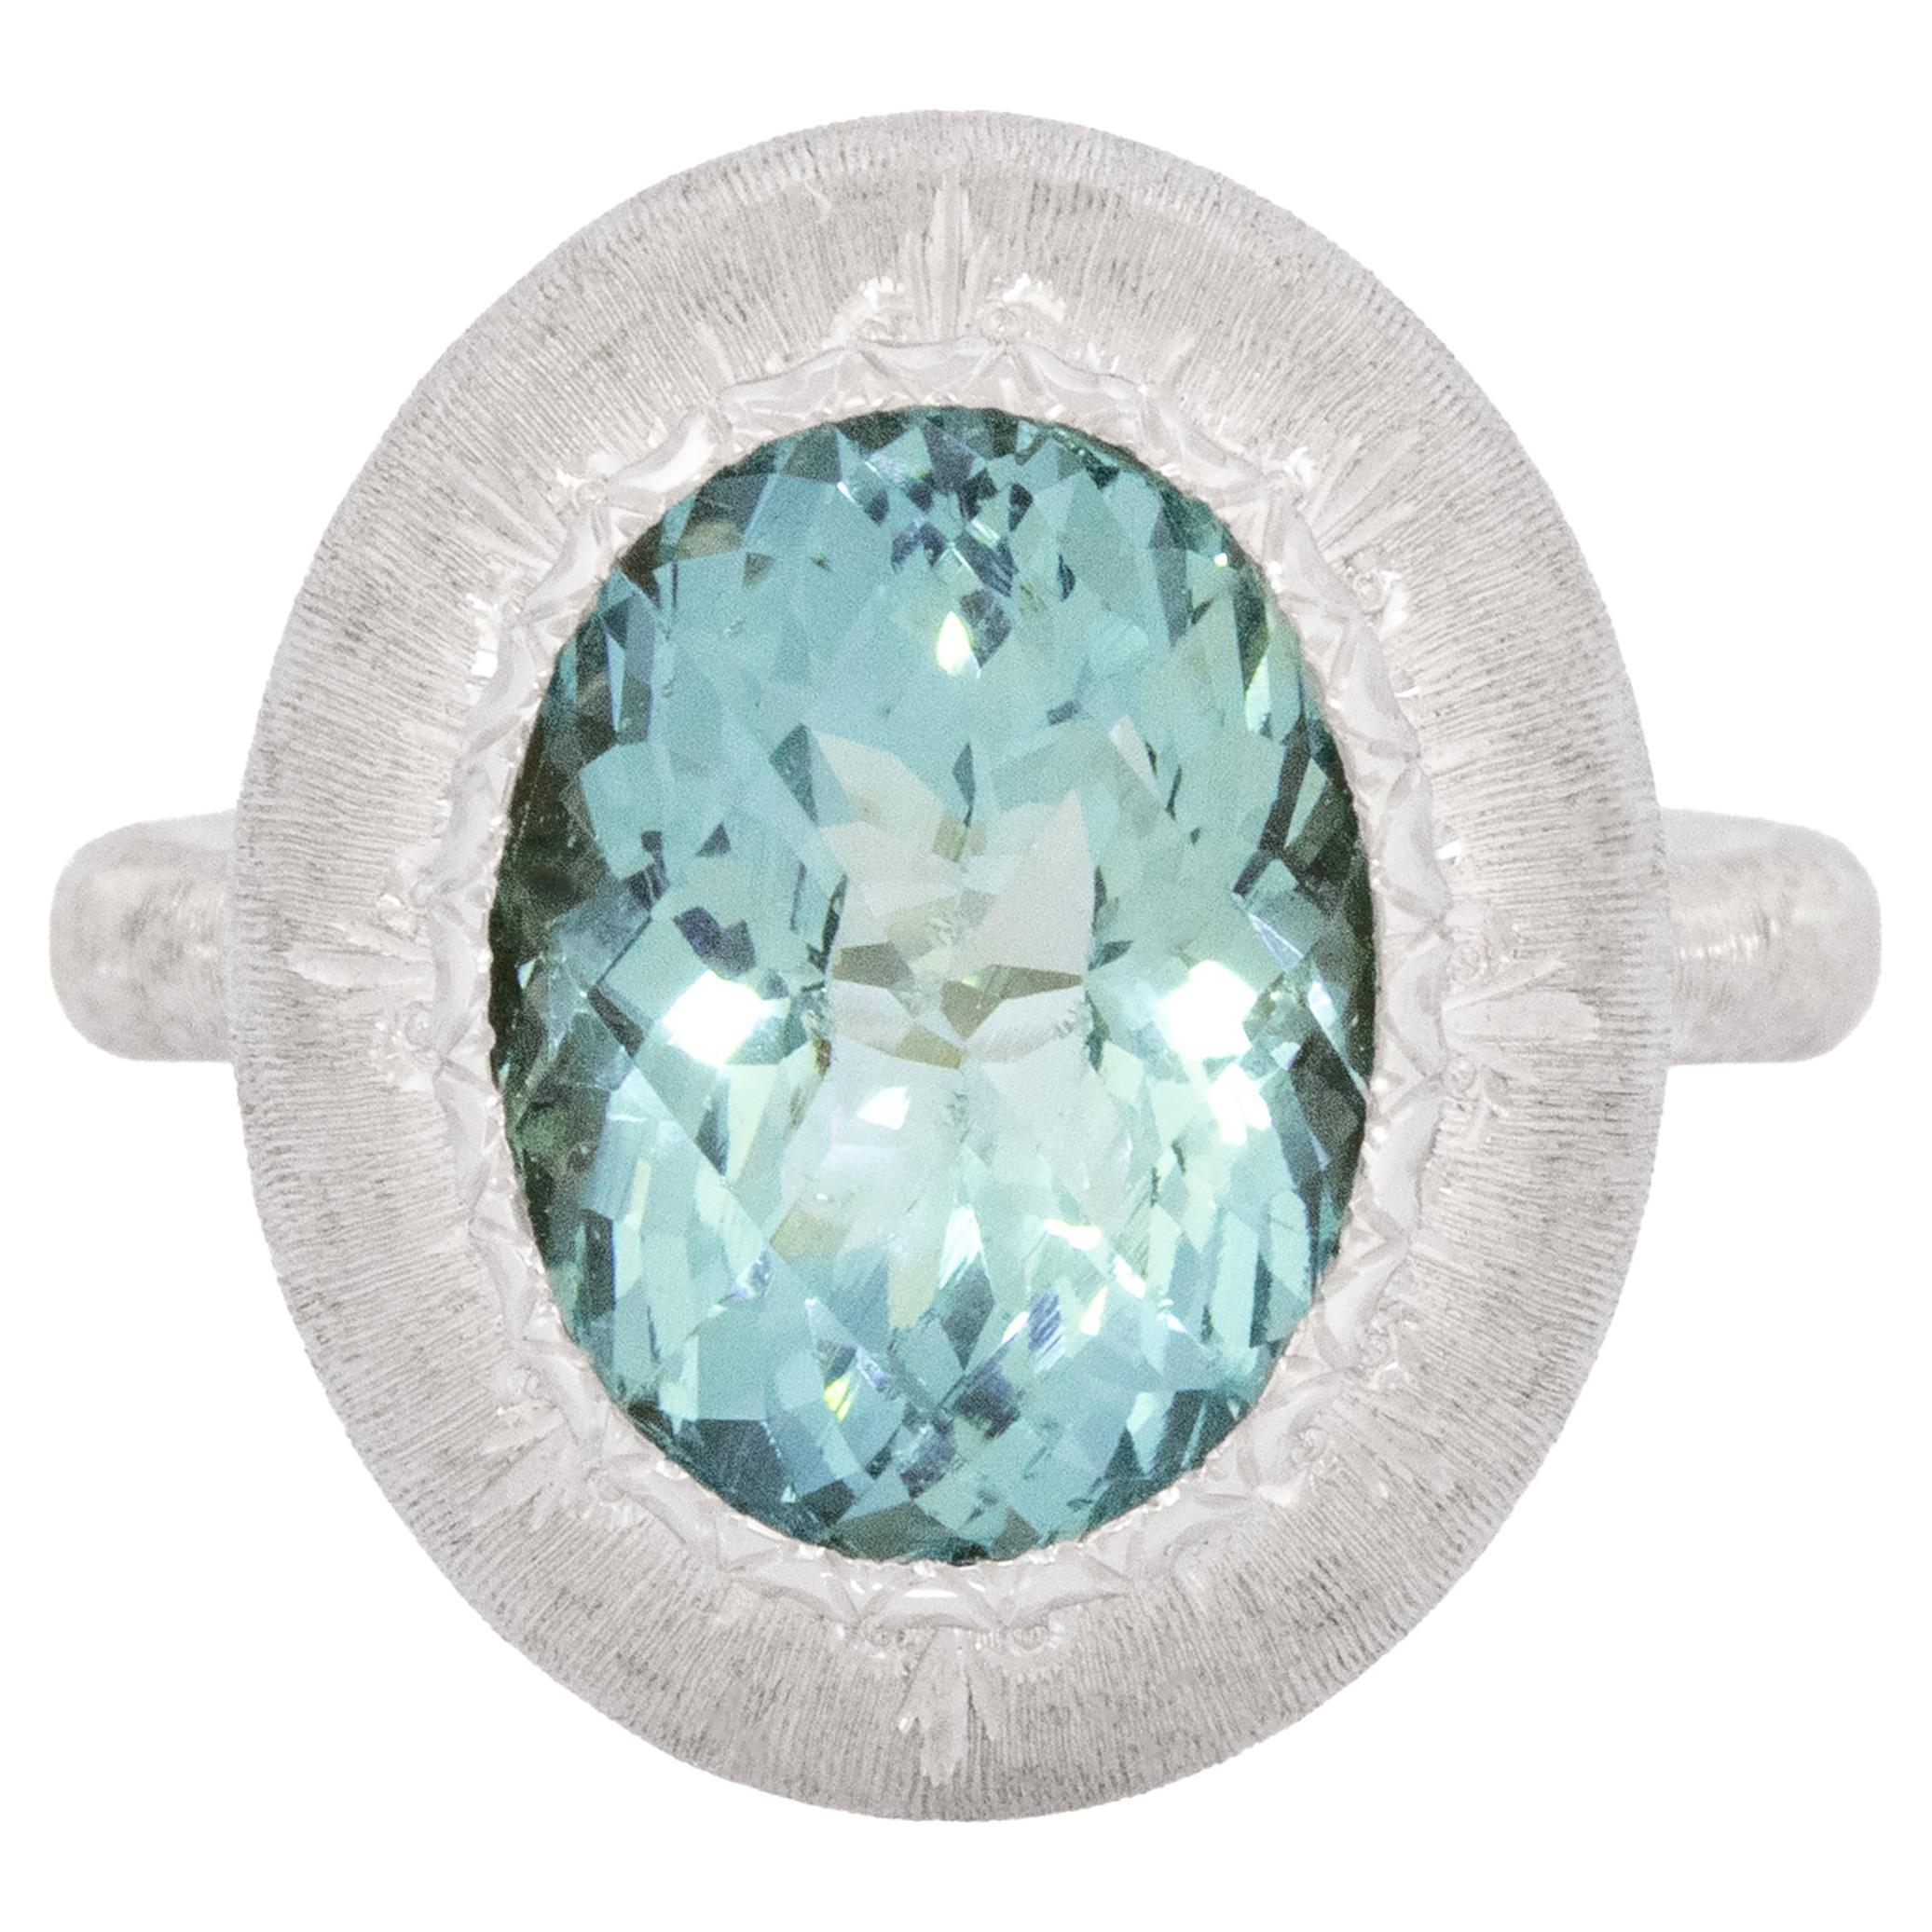 5.80ct Aquamarine in 18kt Gold Ring, Handmade in Florence, Italy